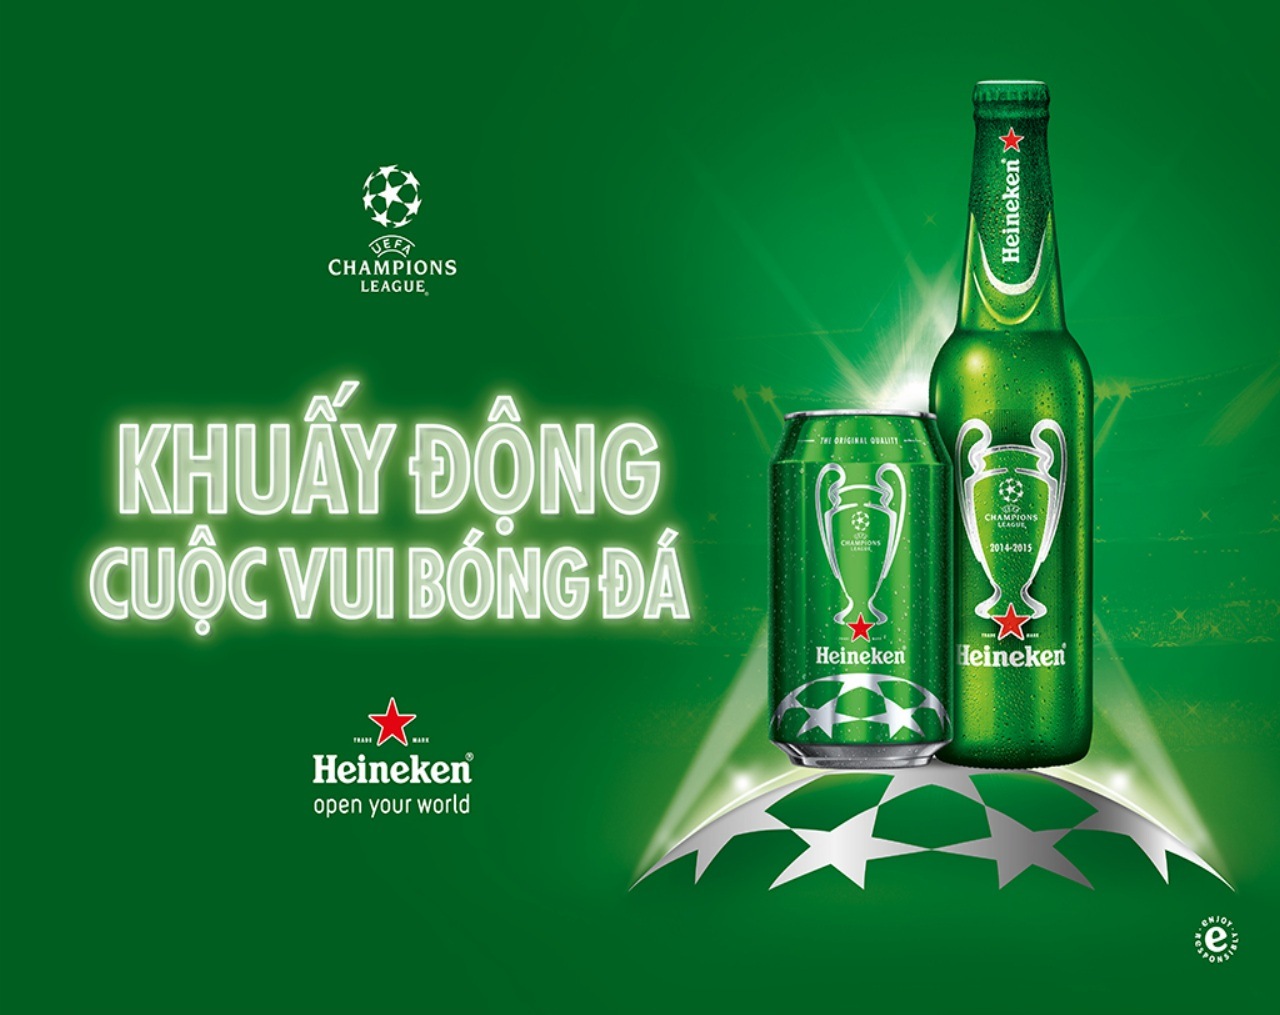 Heineken match" with the UEFA Champions League campaign 2015